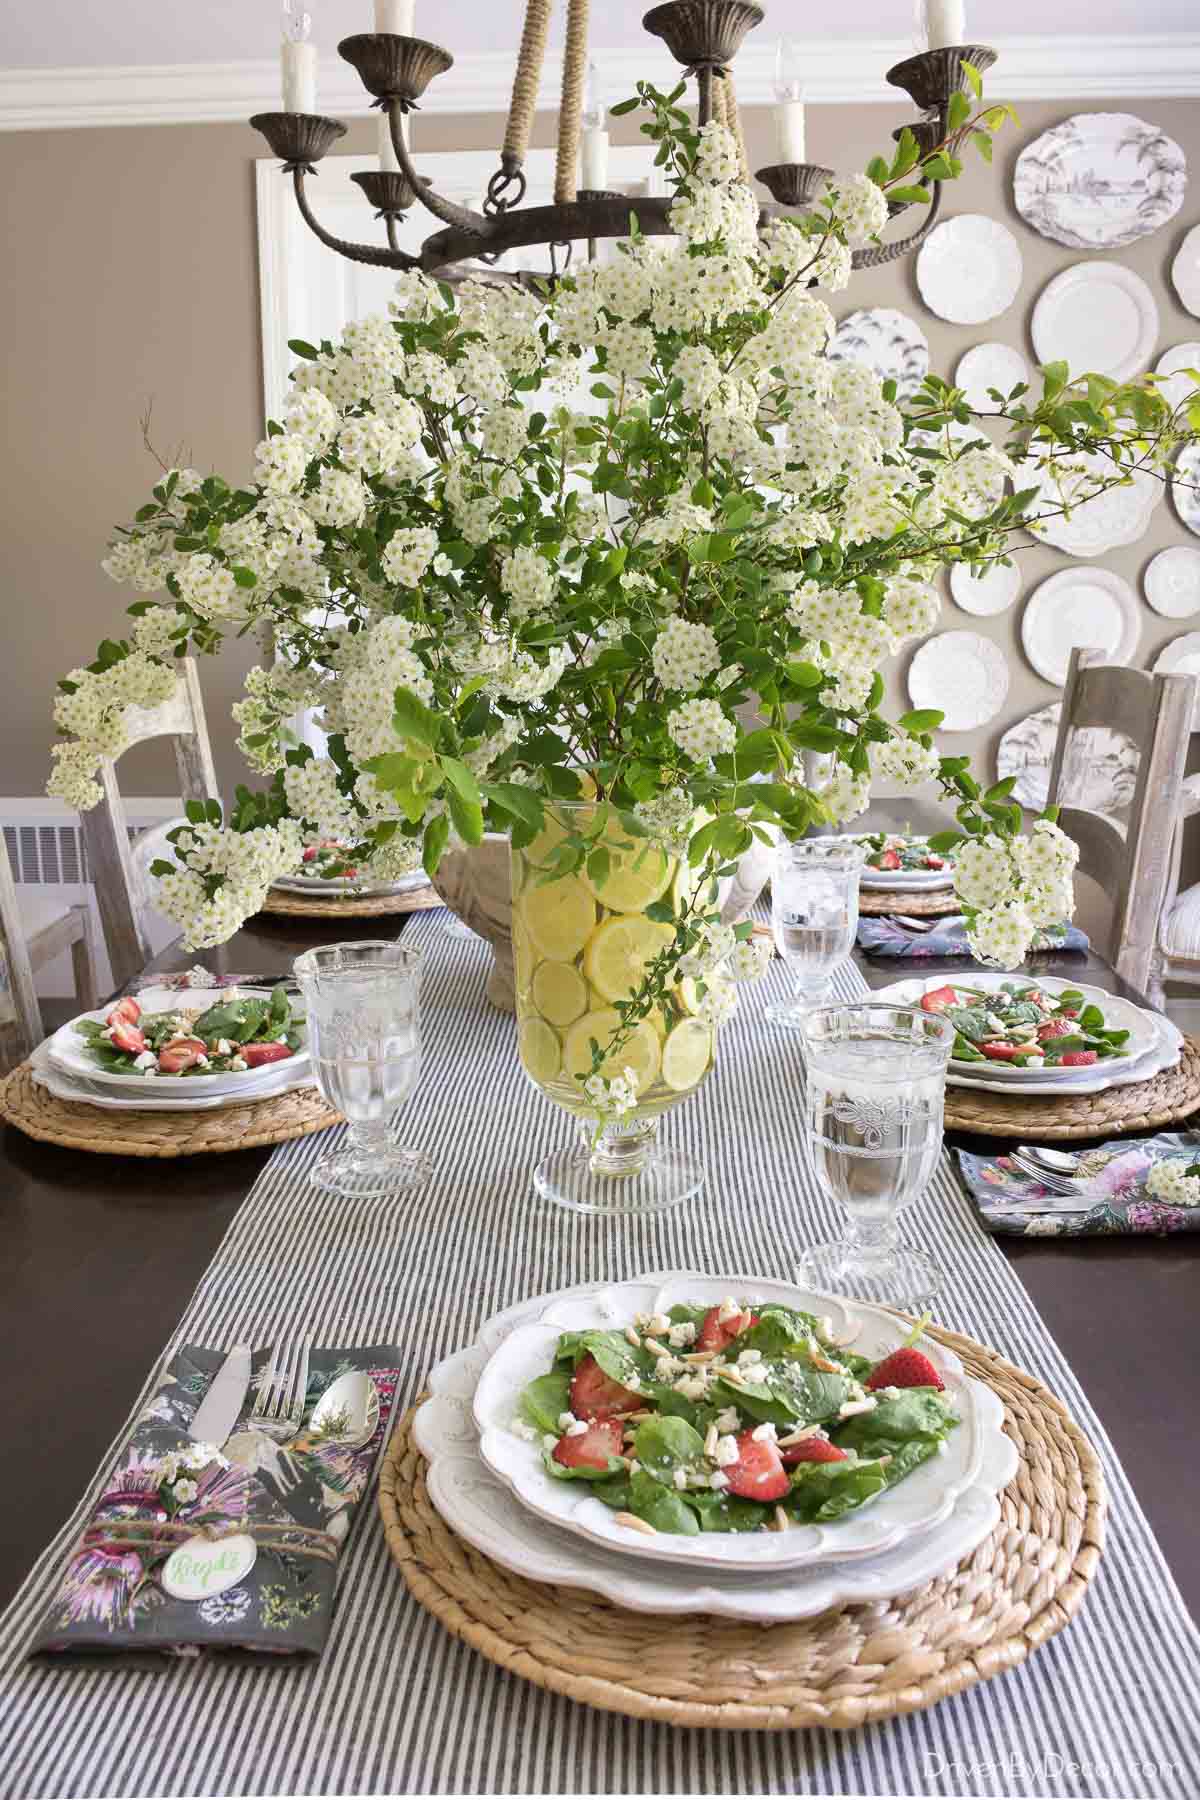 A lemon-lined vase is perfect for Easter table decor!